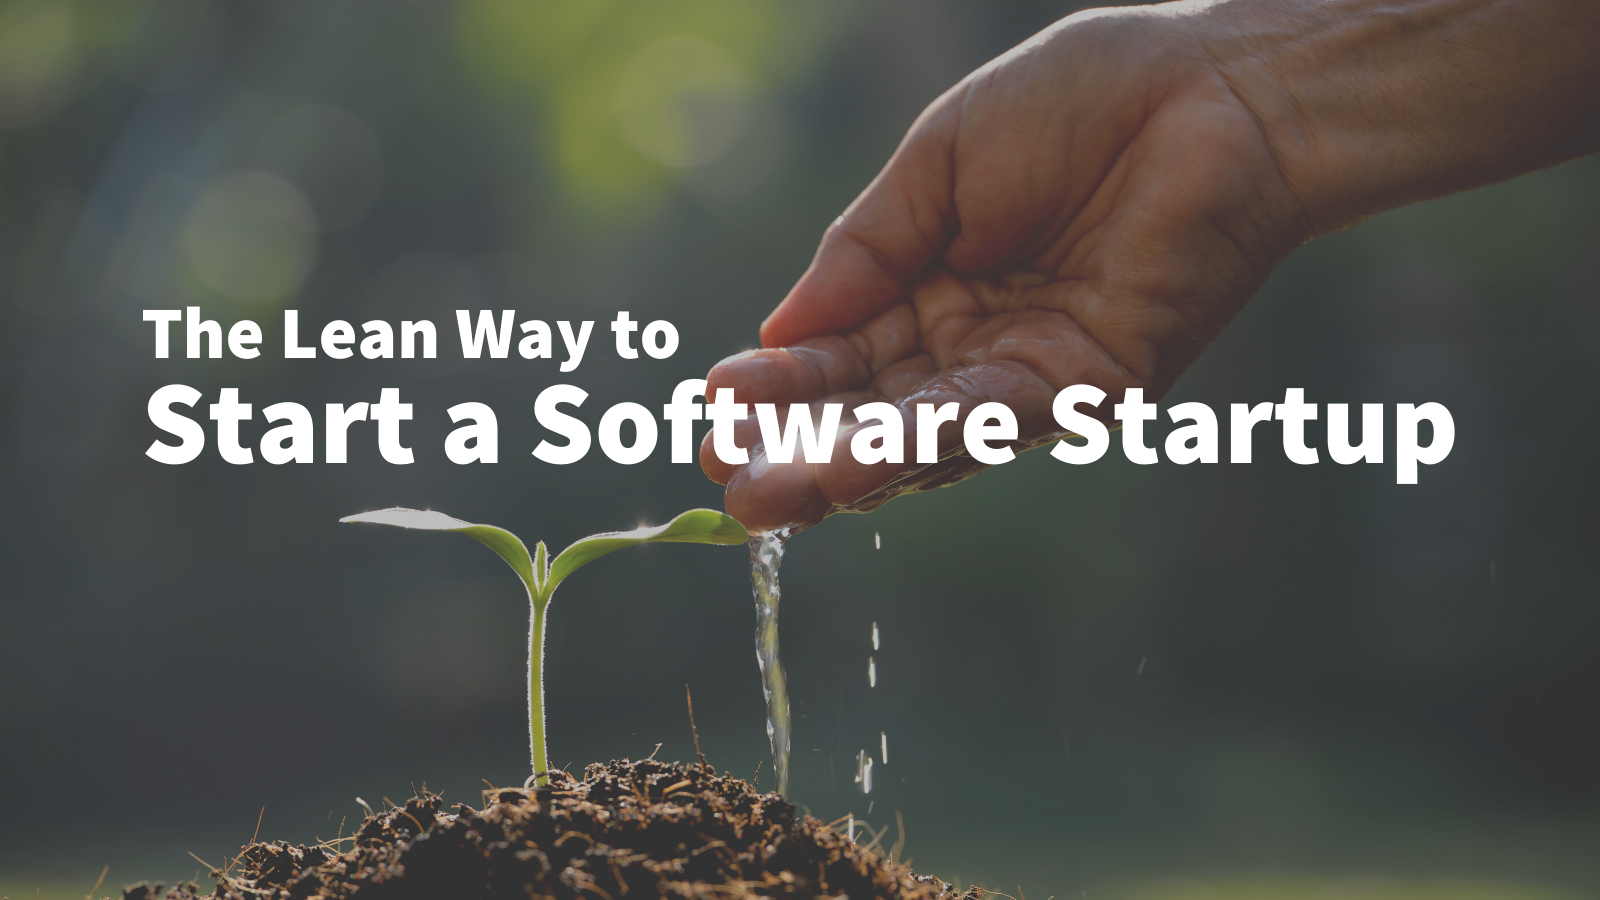 Starting a Software Startup the Lean Way